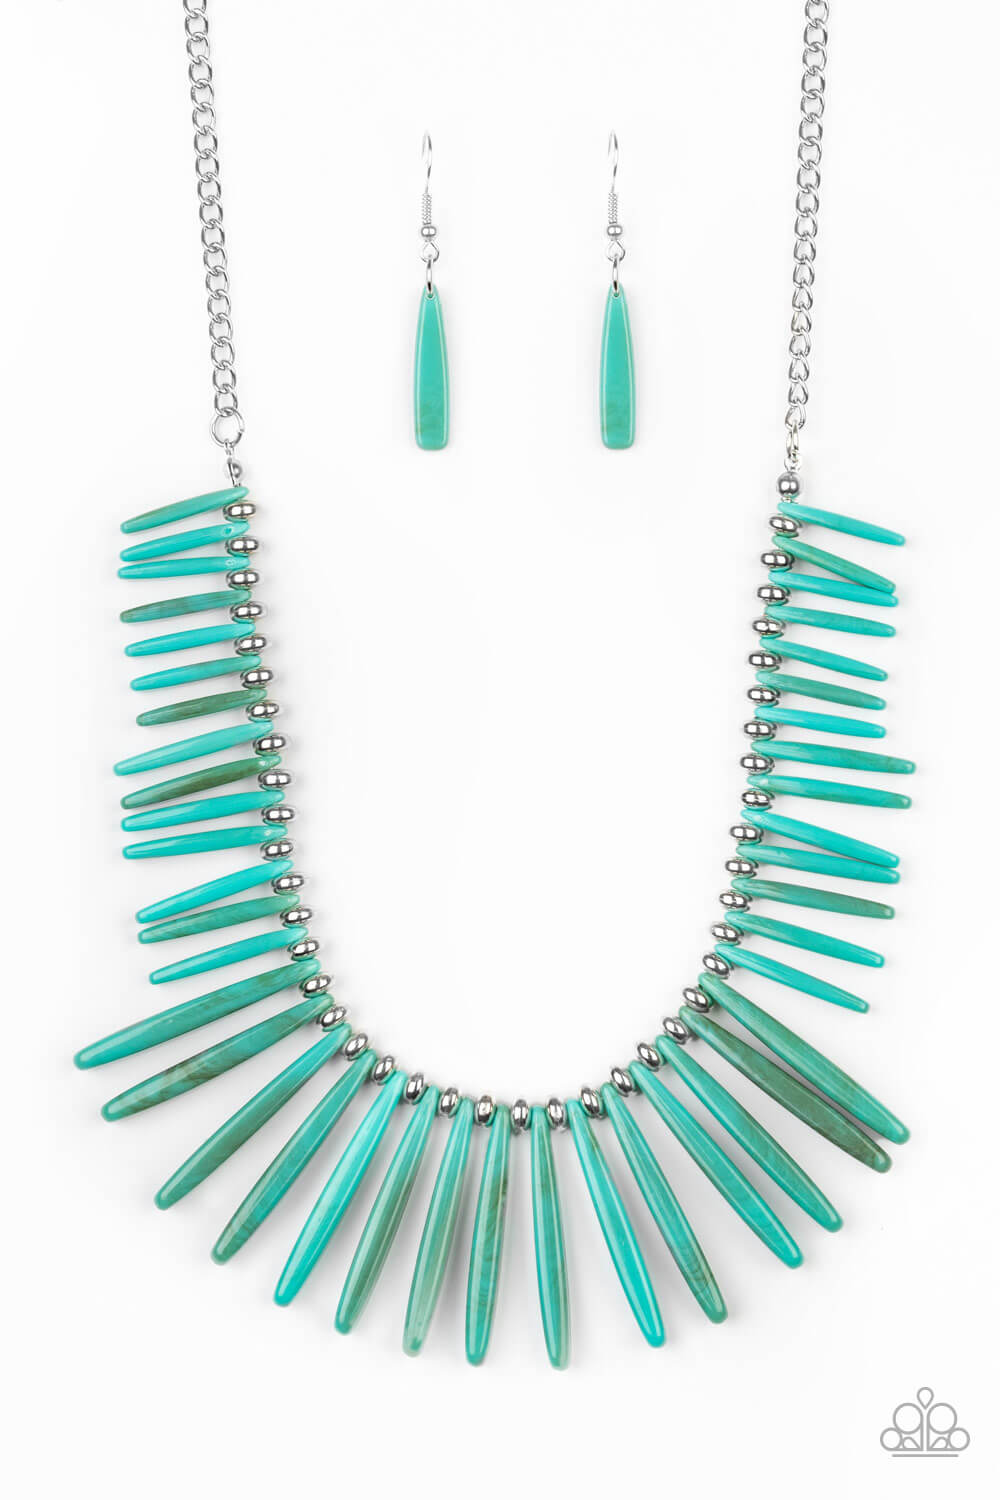 Out of My Element - Blue Necklace Set - Life of the Party Exclusive - Princess Glam Shop